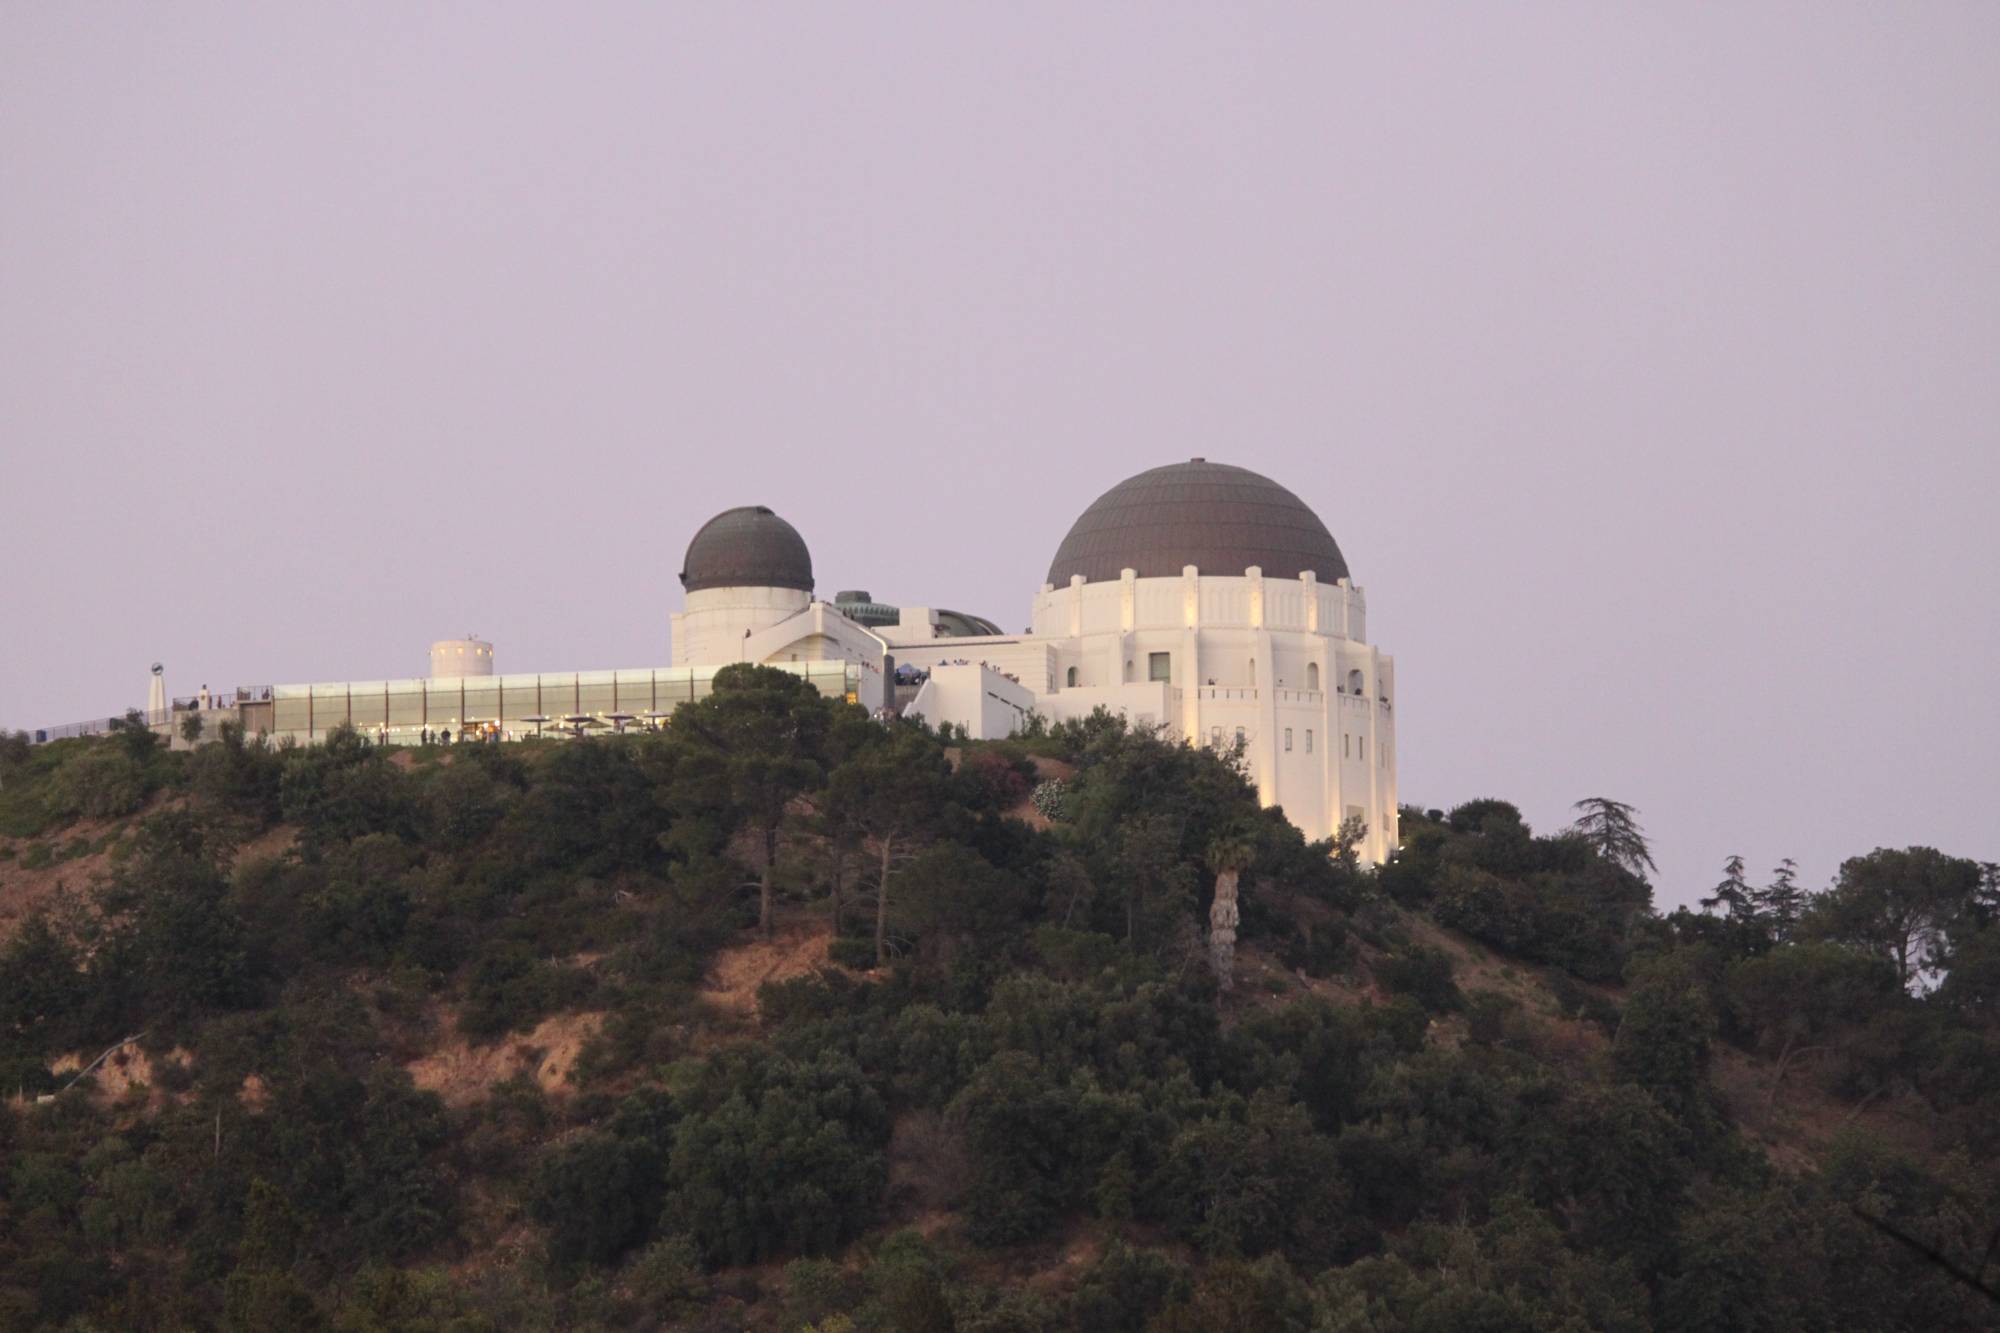 Griffith Observatory - taken from Griffith Park (Los Angeles)